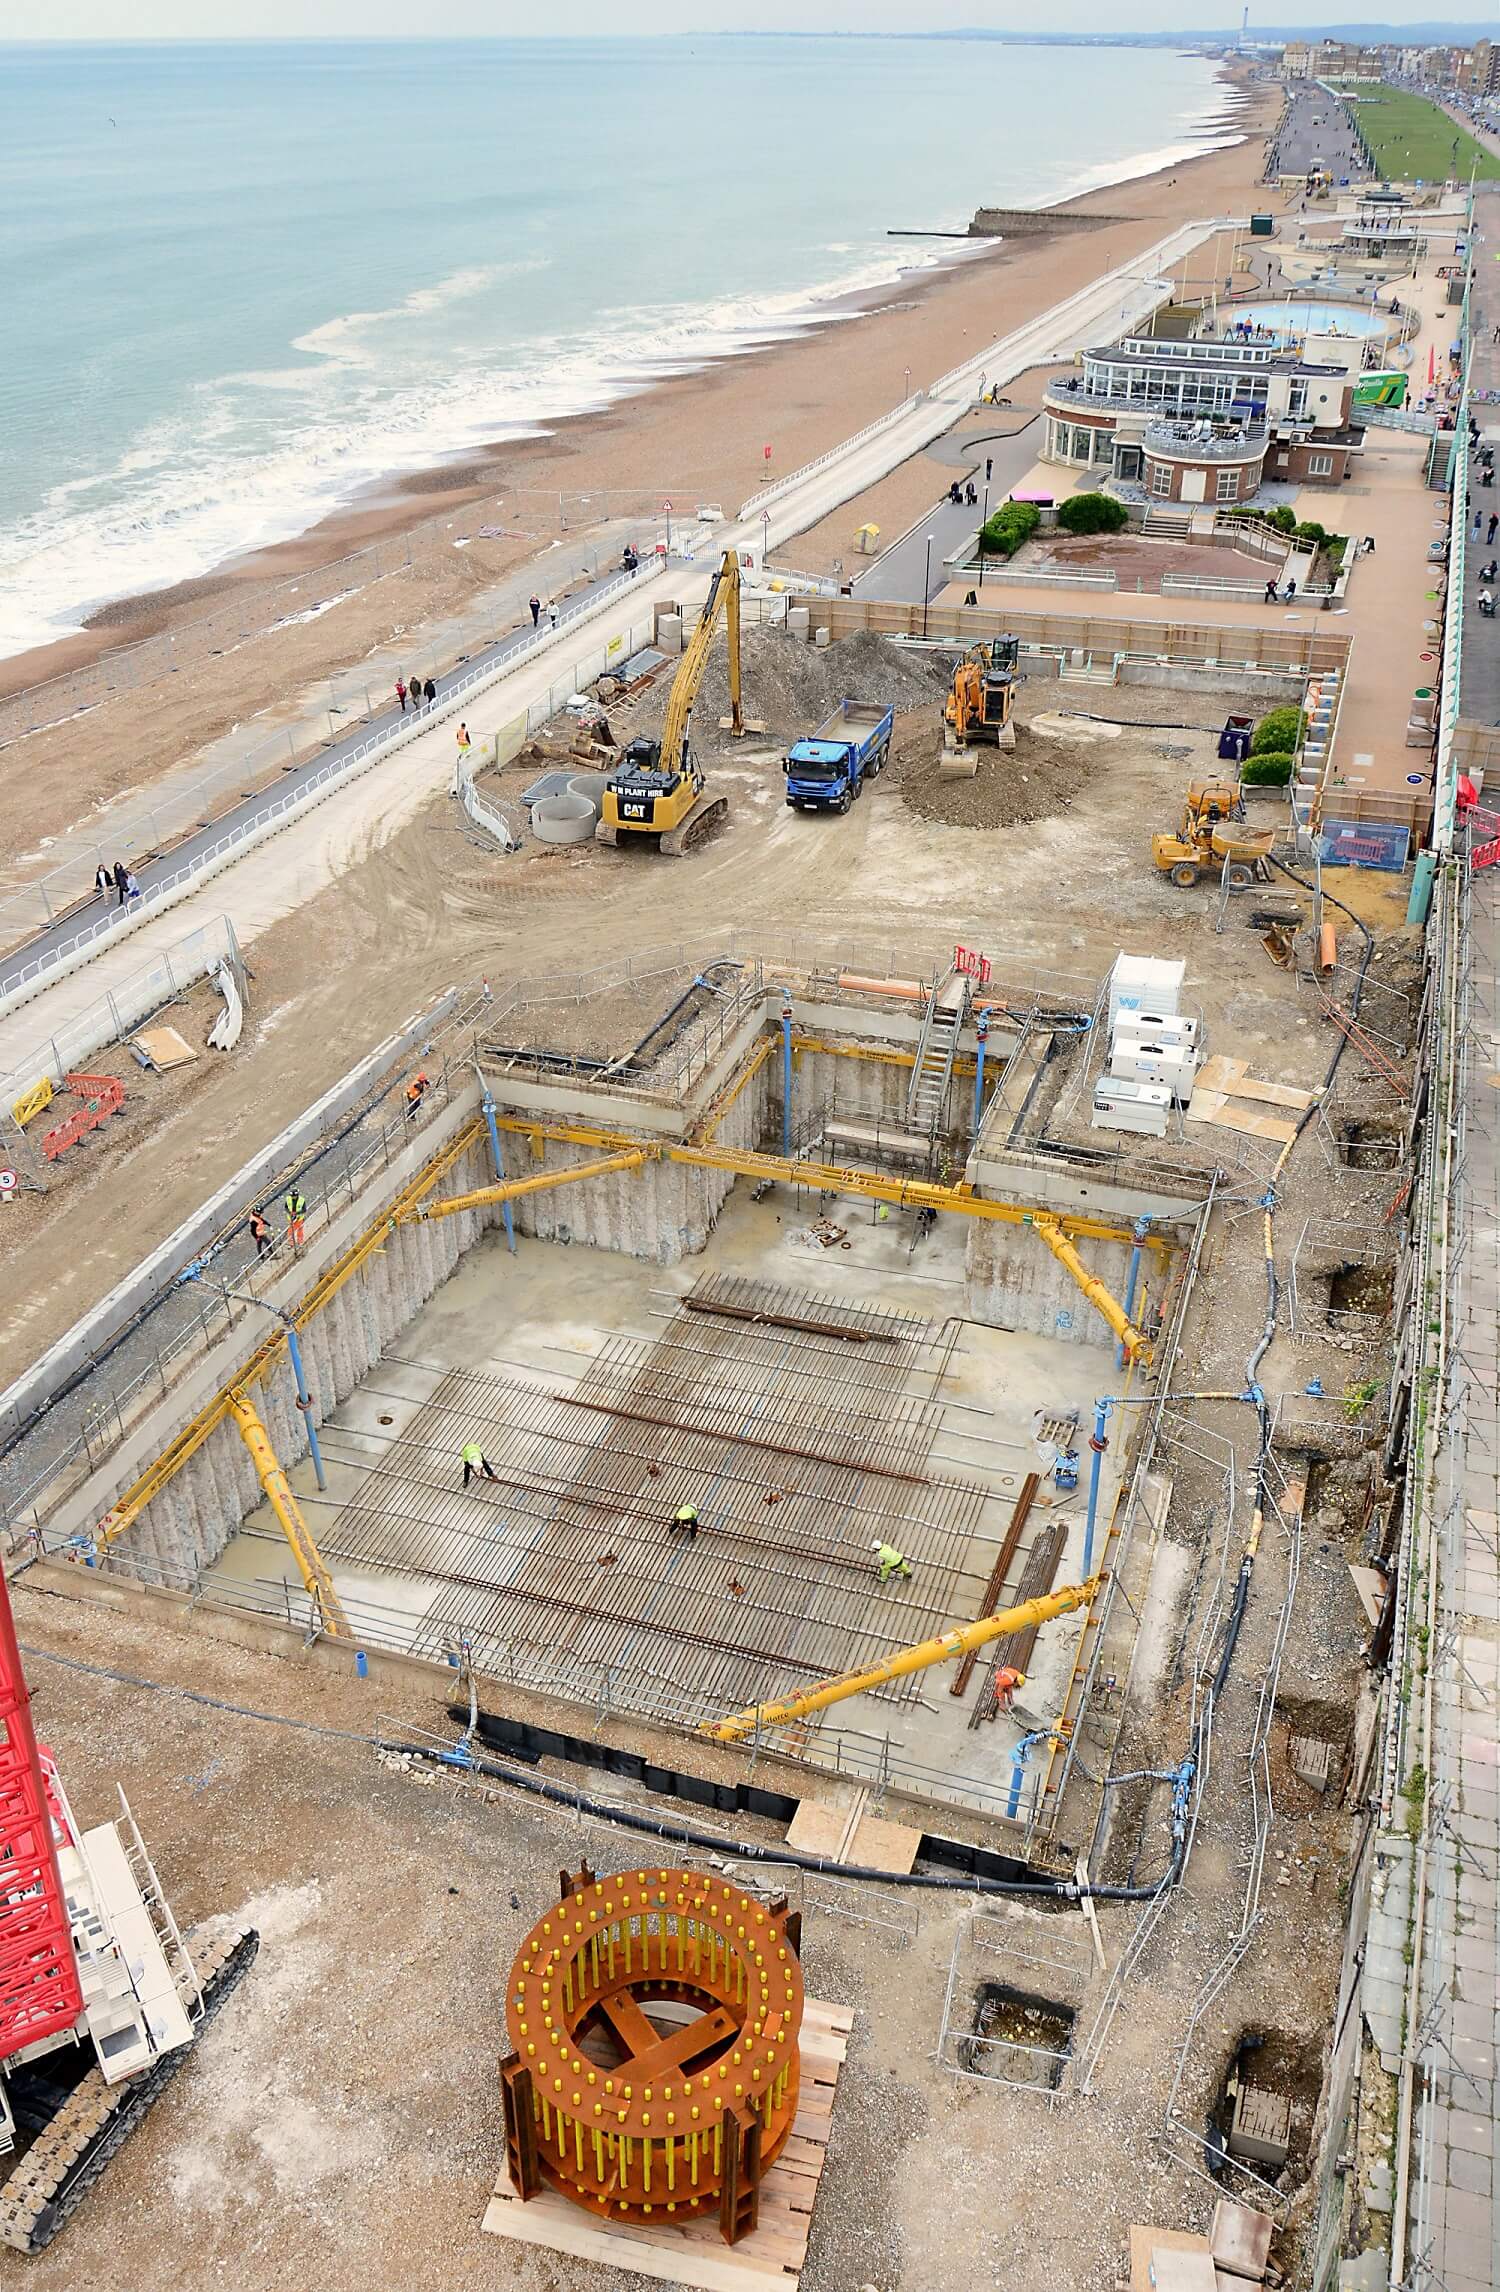 Retaining Wall Solution - BA i360 Tower Project - Secant CFA Wall site photo (1)